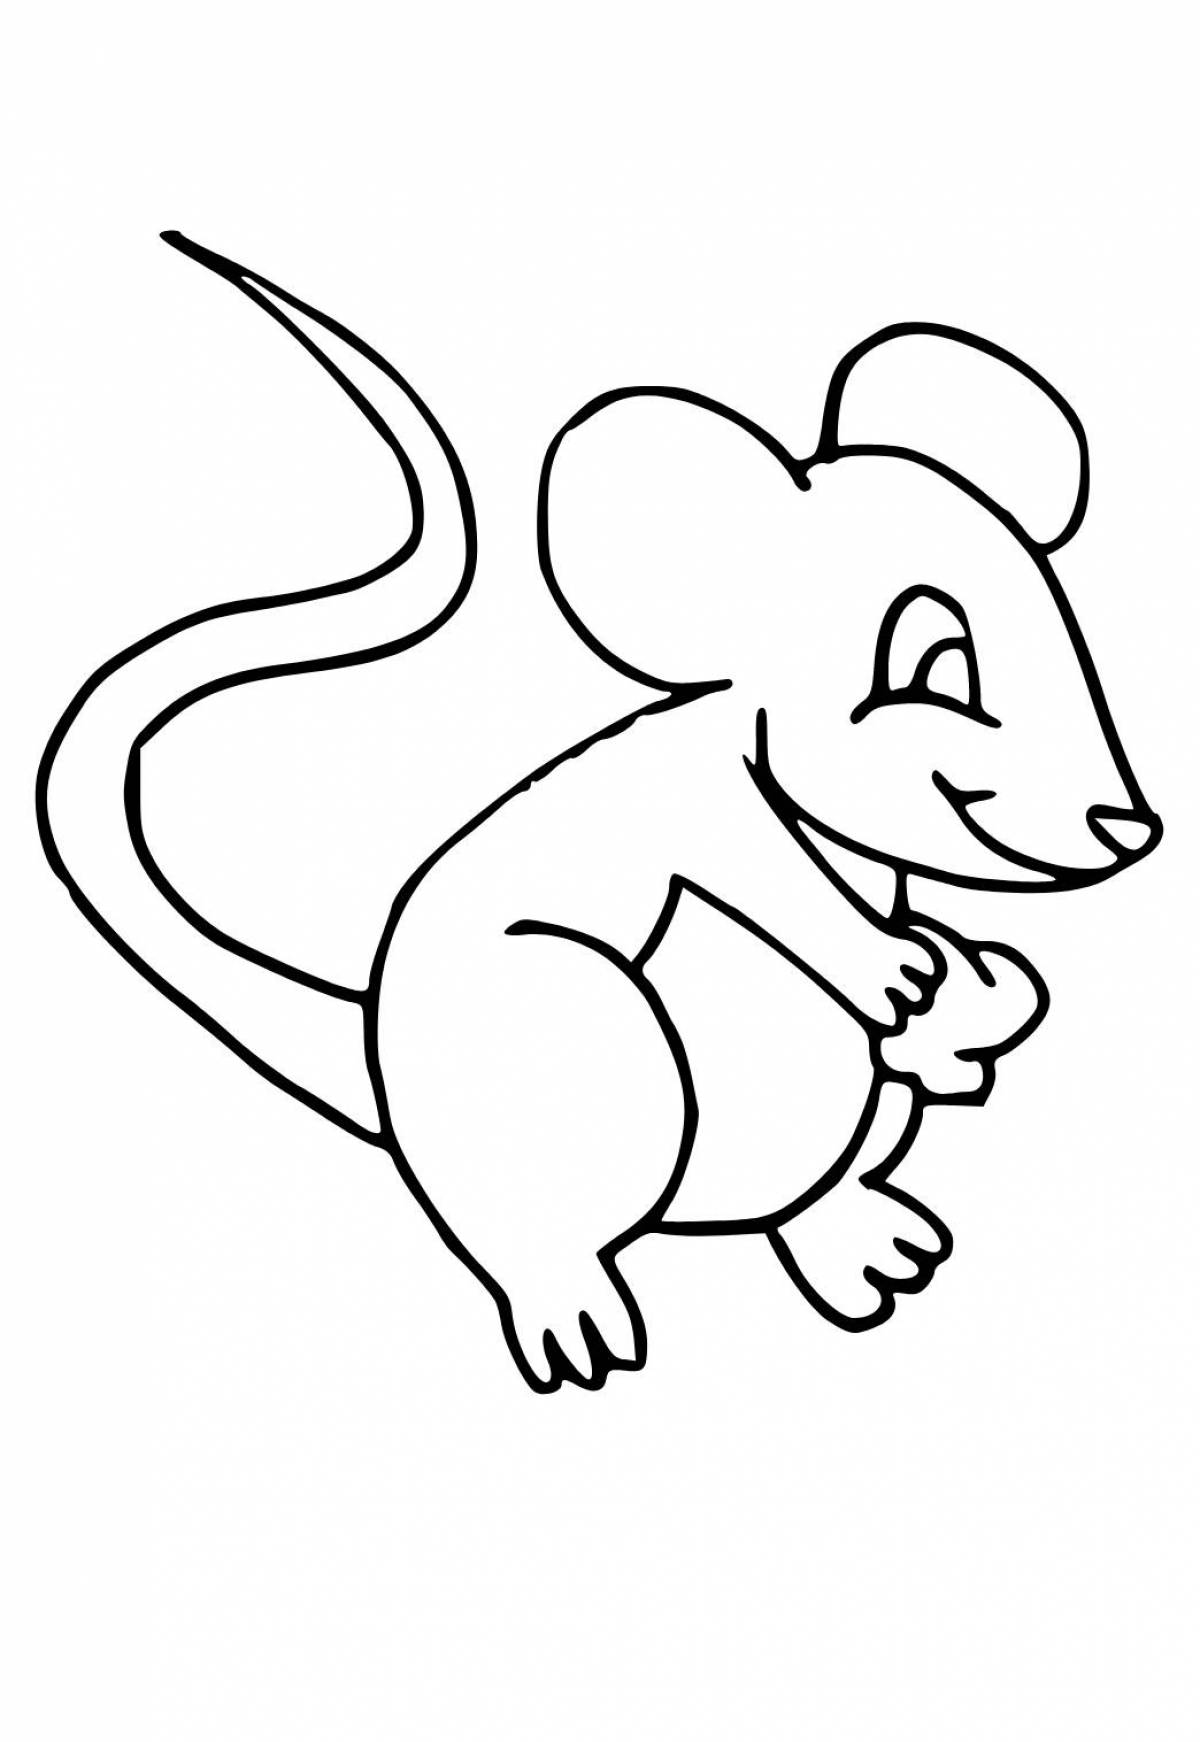 Adorable mouse coloring book for kids